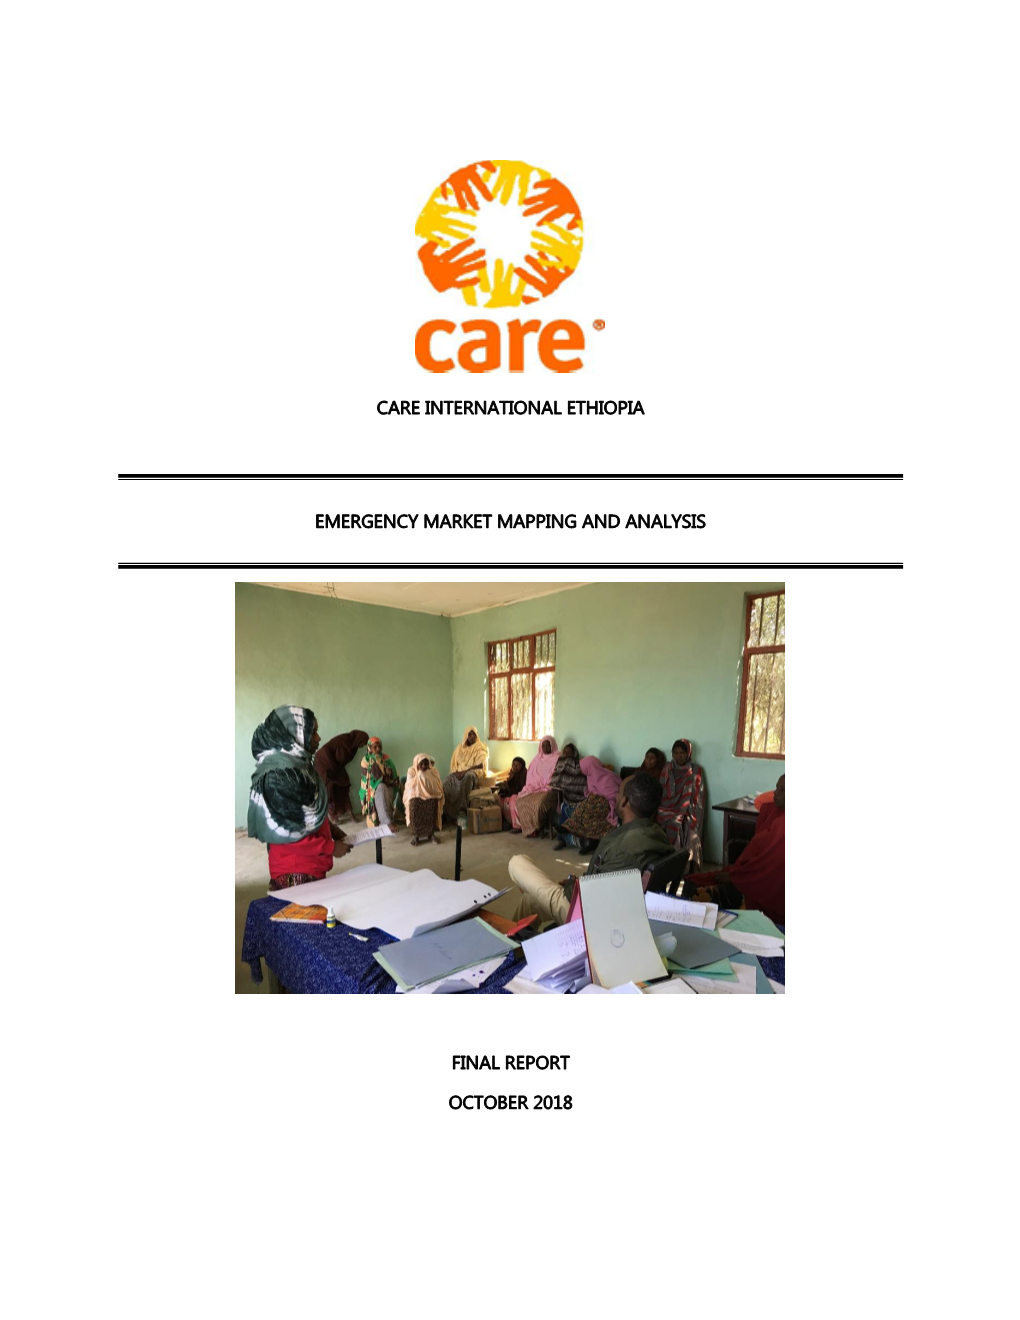 Care International Ethiopia Emergency Market Mapping and Analysis Final